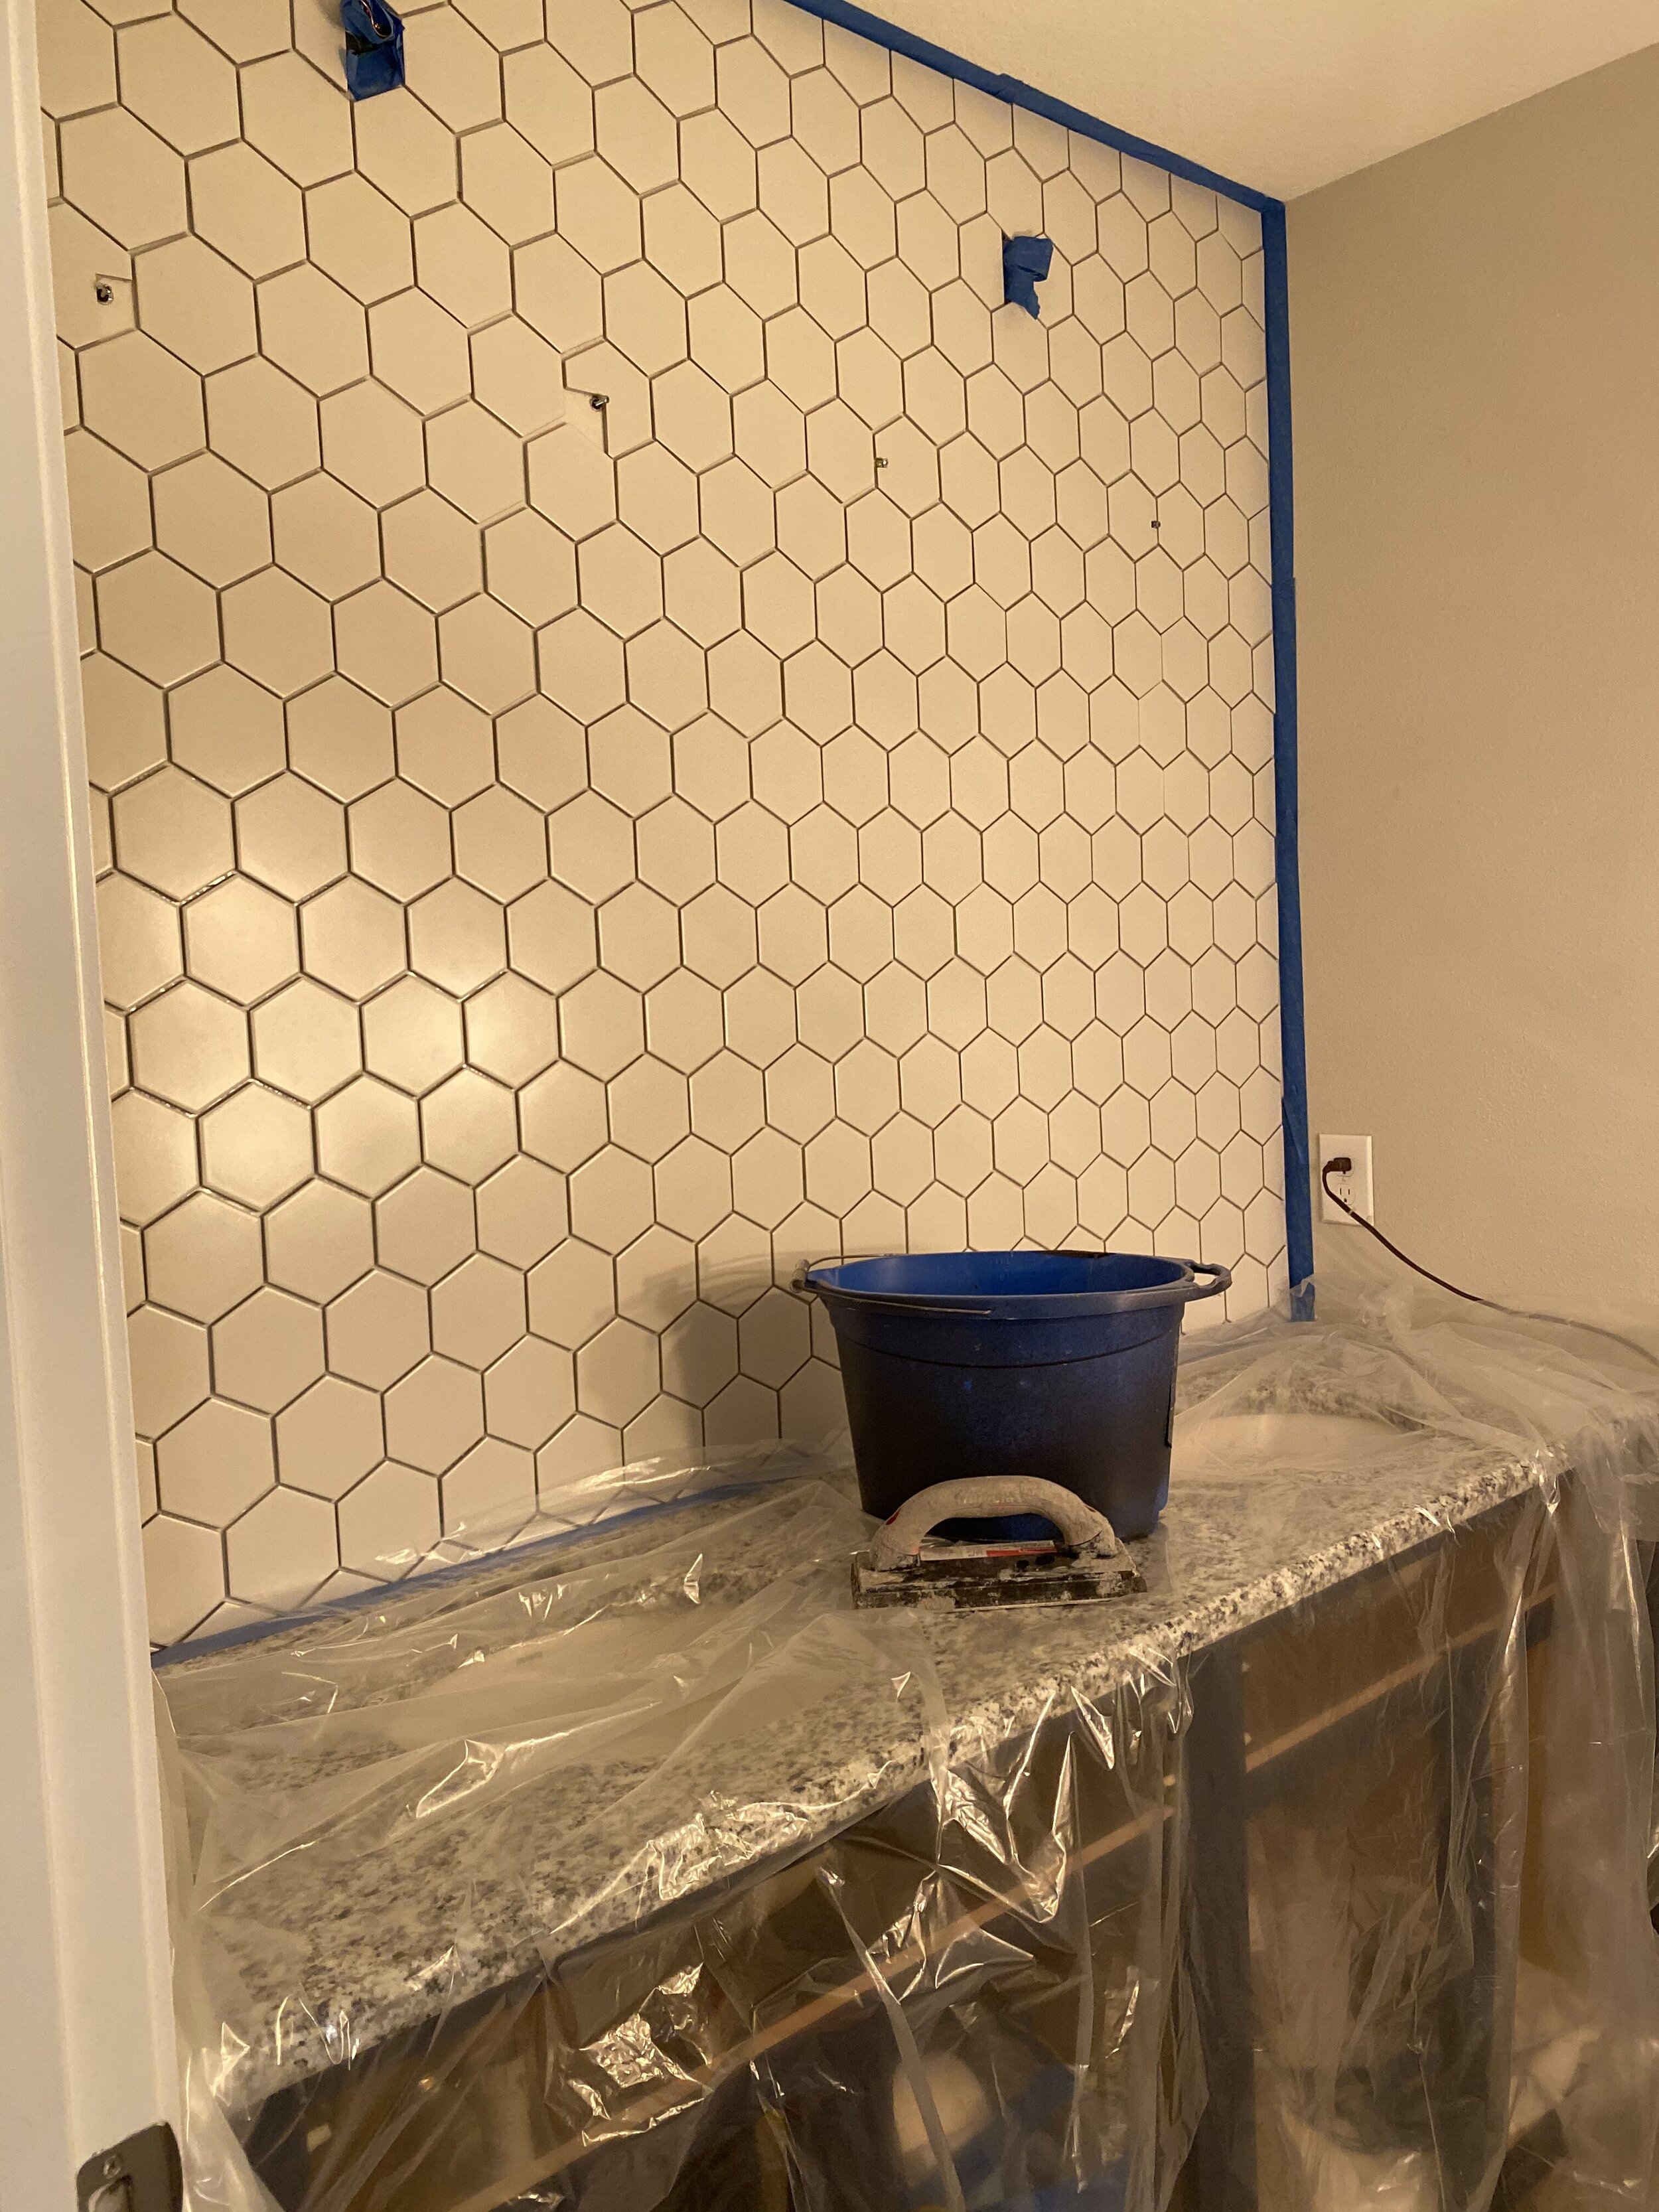 All the tile is cut and in place, walls taped off, and we’re ready for grout!